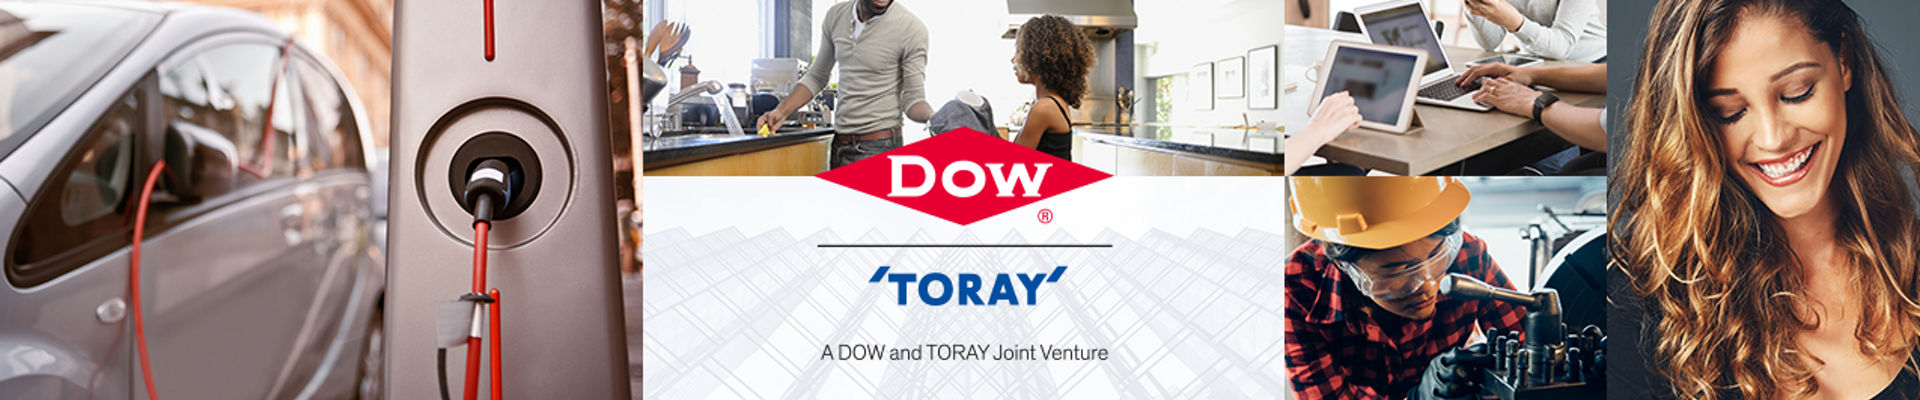 Dow & Toray logo with images of EV charging, family washing dishes, office workers, worker adjusting machine and woman smiling.